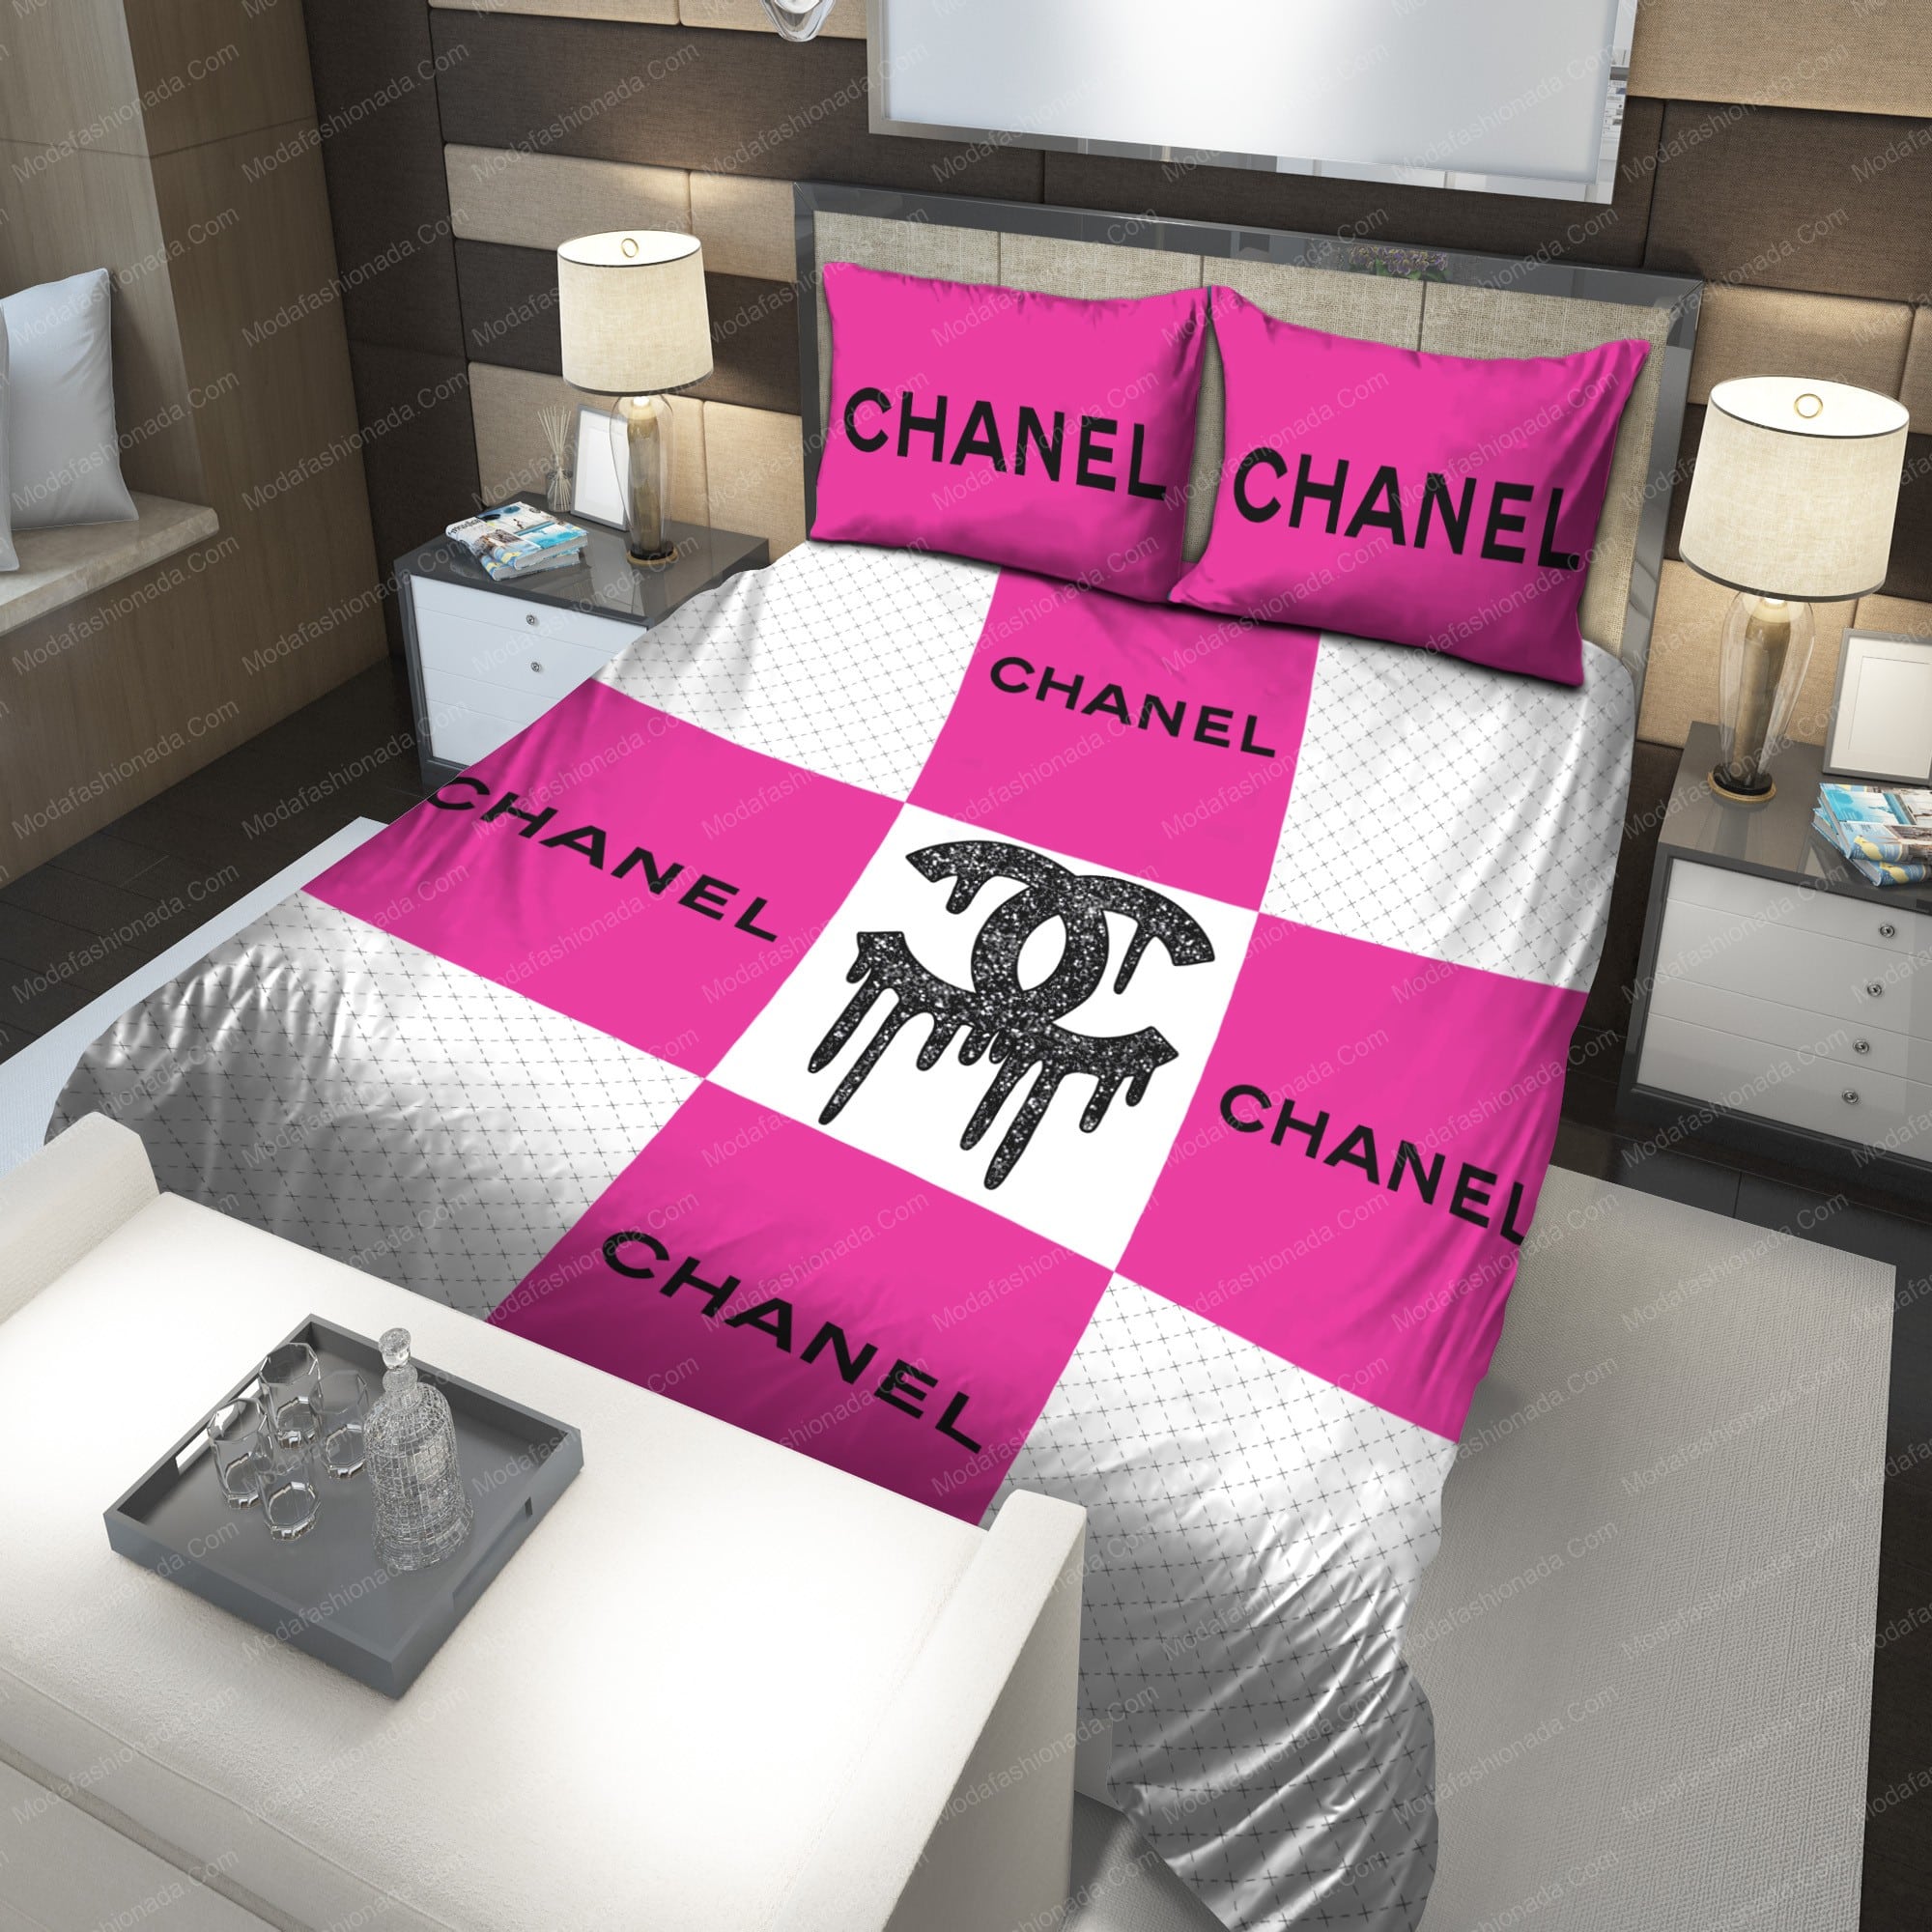 chanel-bed-set - ch-21, chanel bedding set 4 piece 2 pillow…